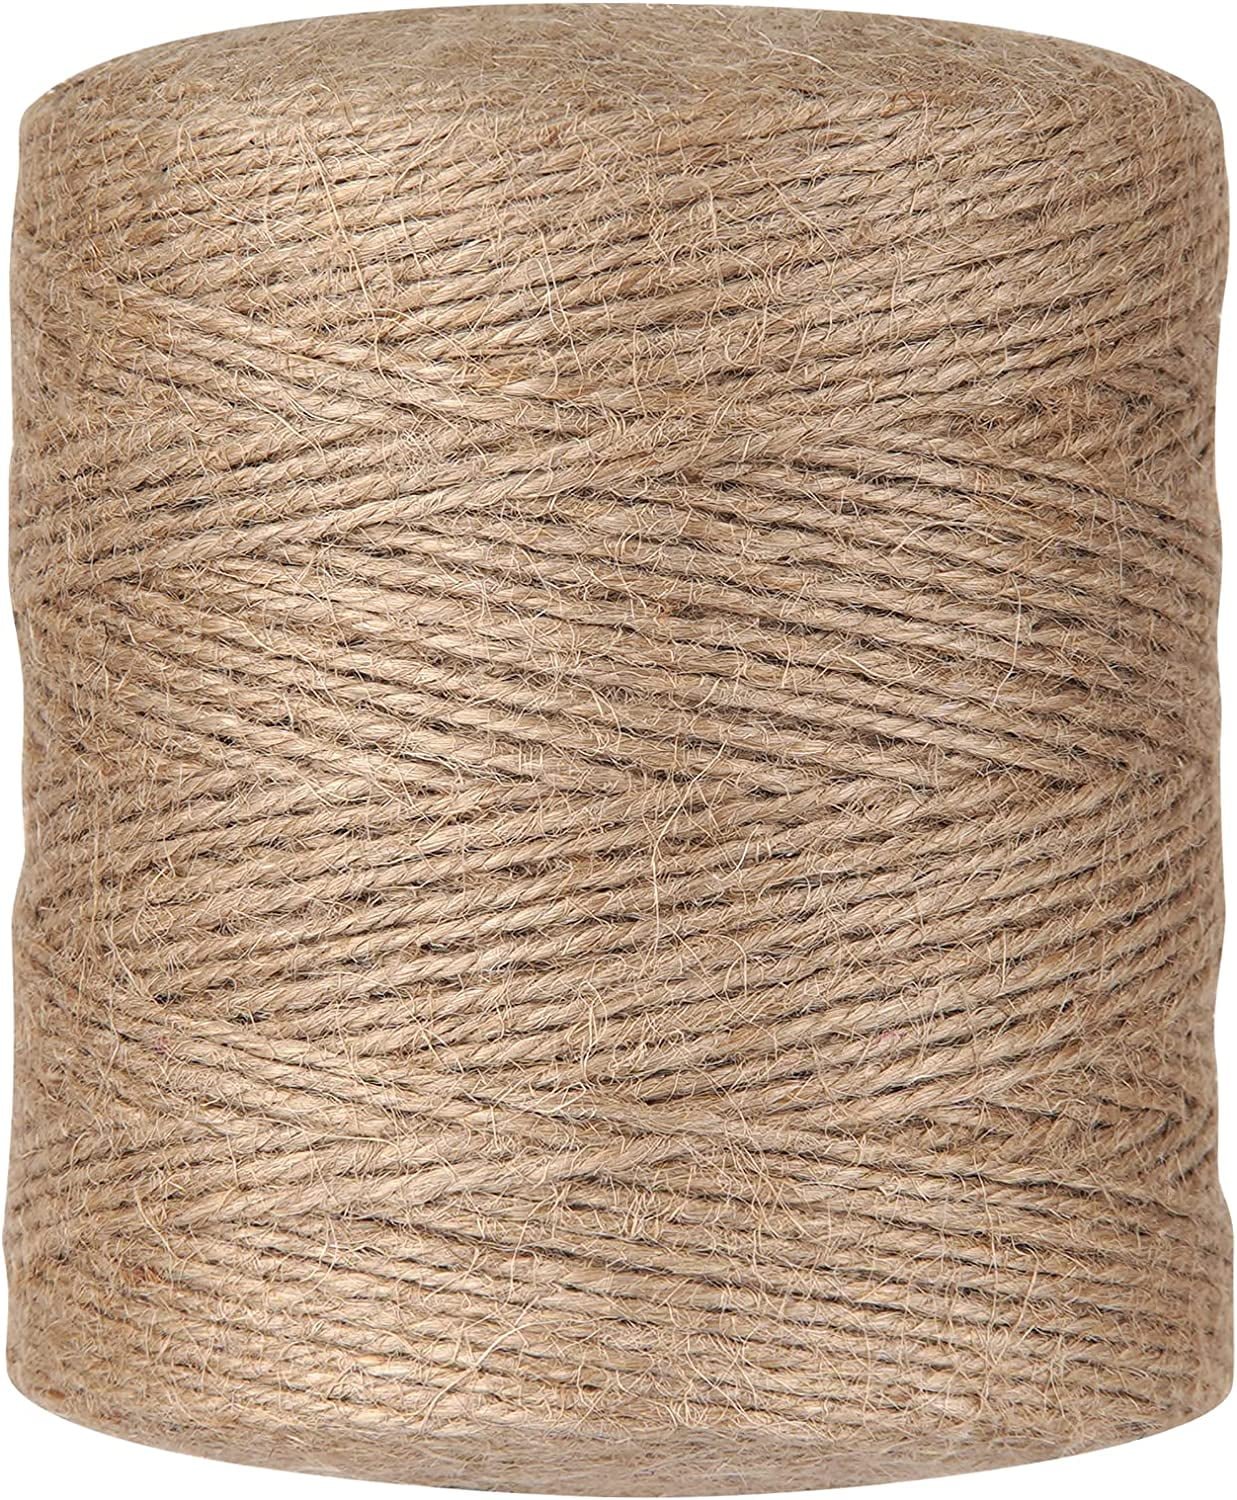 Joyberg 984 ft Twine String, Natural Jute Twine, 2mm Thin White Cotton Twine Rope, 10PLY Black Cotton Twine for Crafts, Art, Gardening Plants, Gift